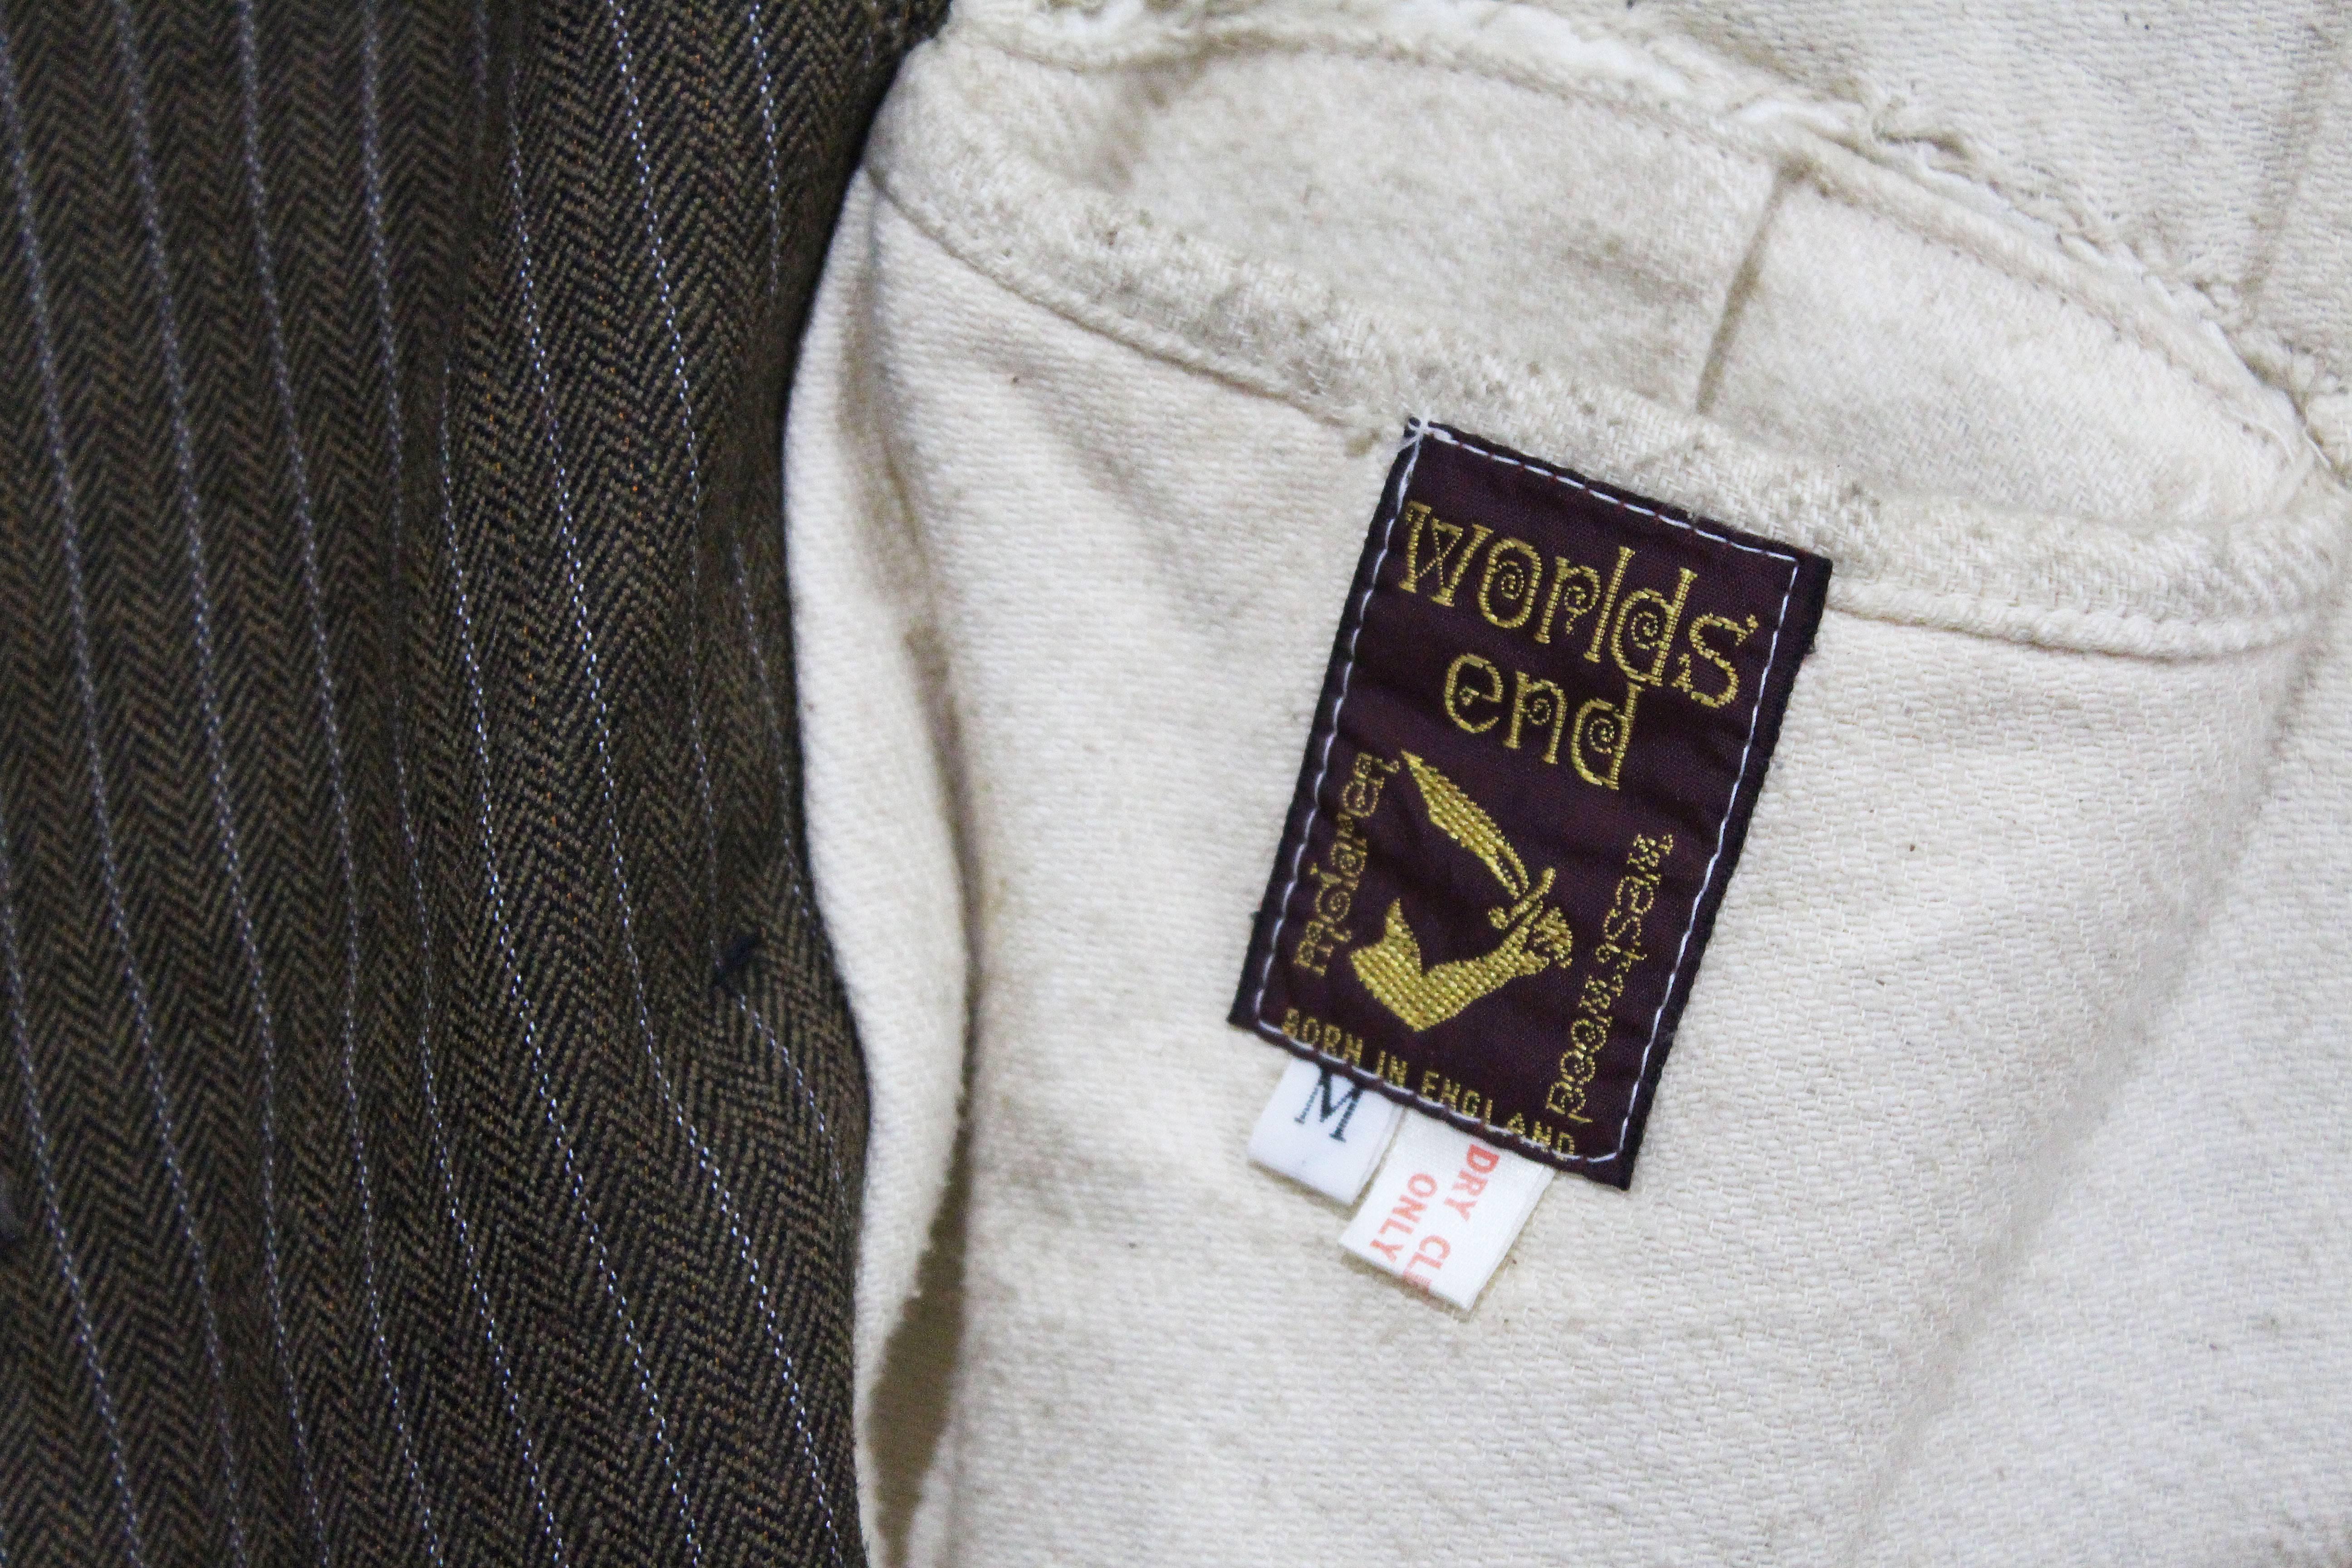 World's End by Vivienne Westwood and Malcolm Mclaren 'Witches' jacket c. 1983 1